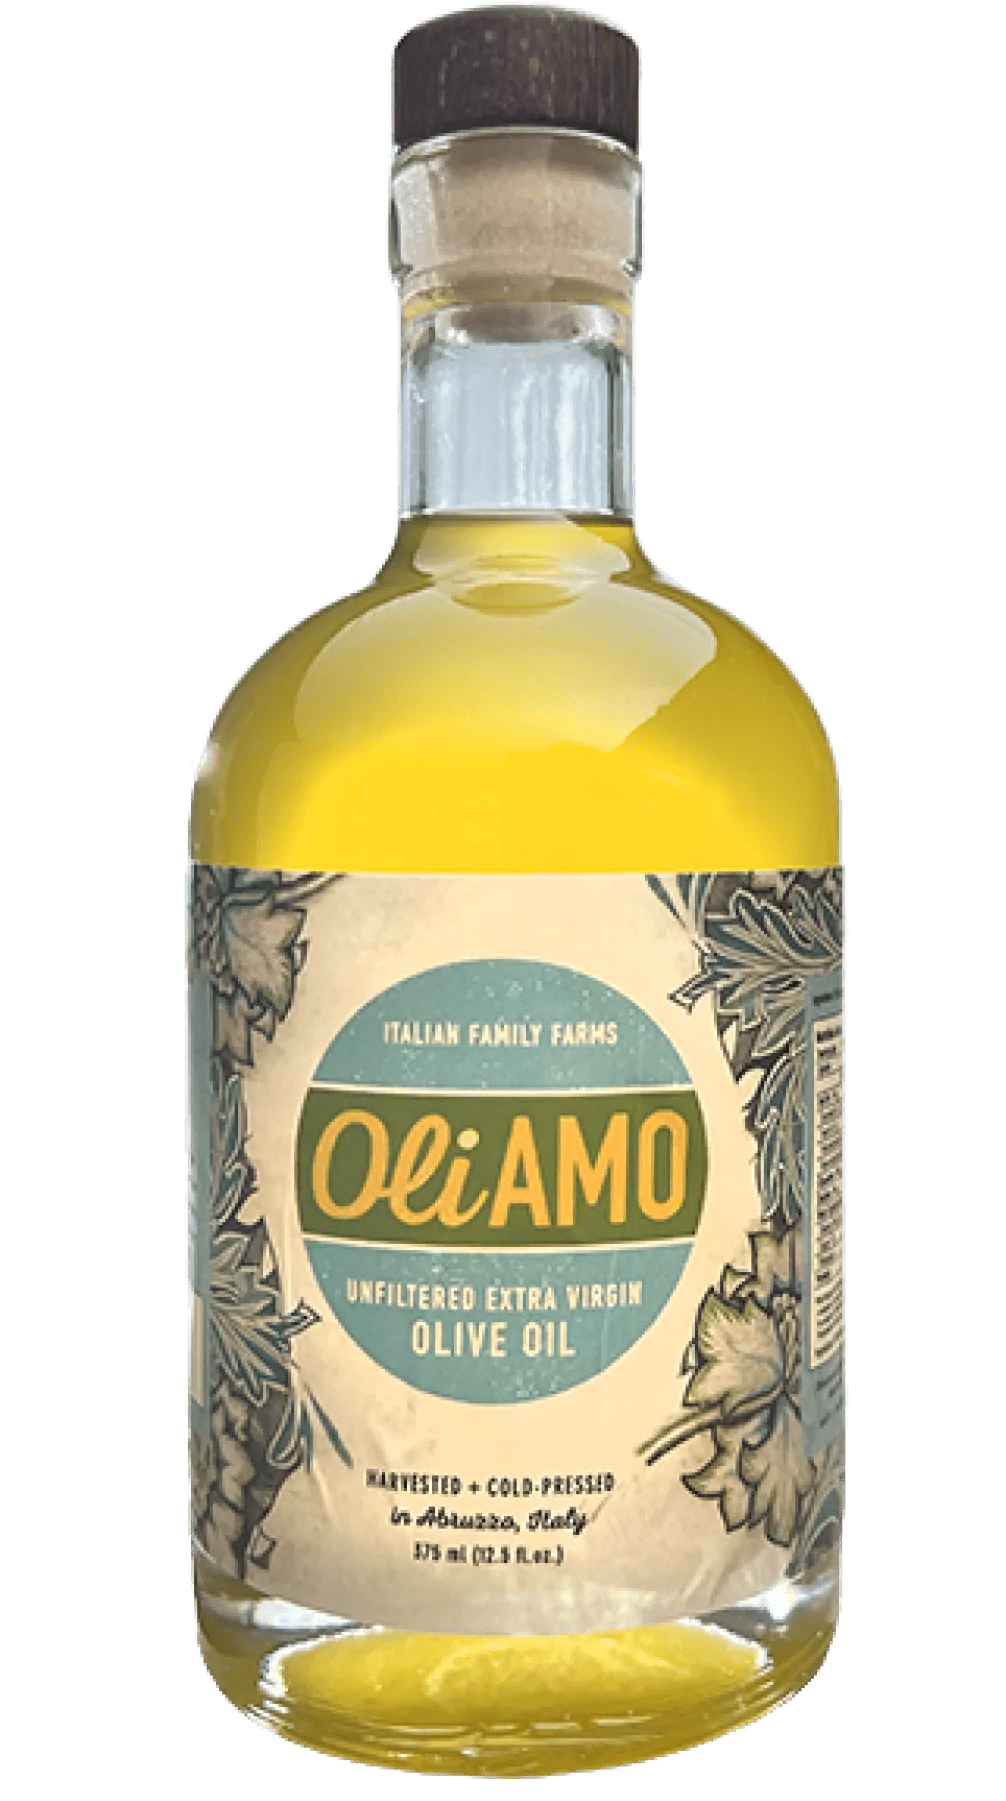 OliAMO Unfiltered Extra Virgin Olive Oil